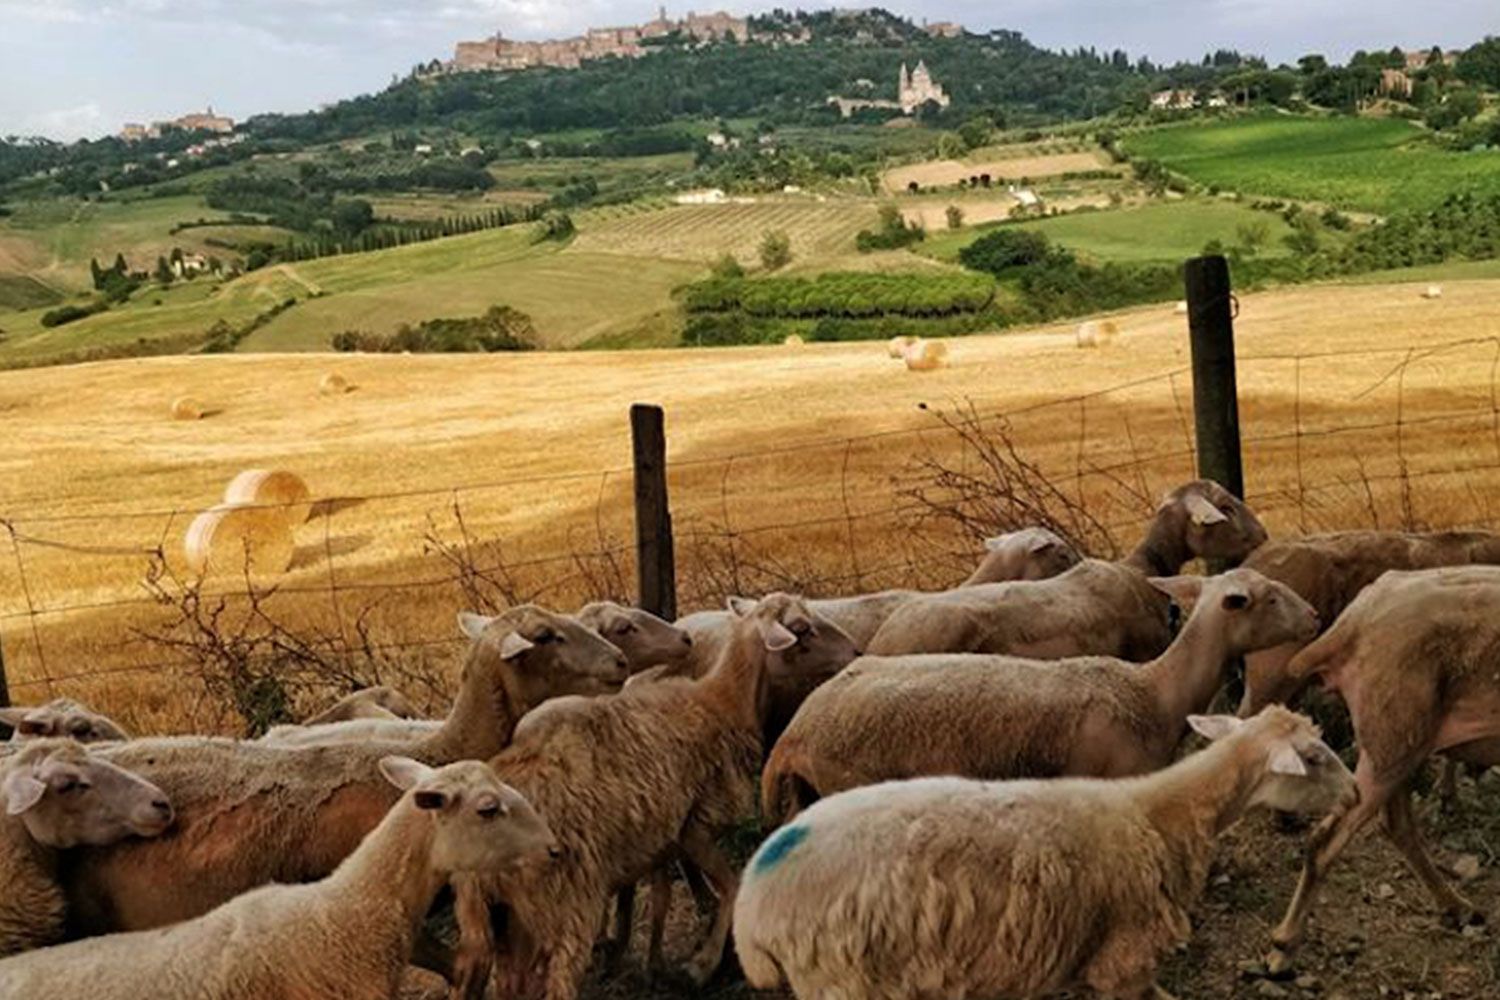 Sheep on their way to be milked with Montepulciano in the background.